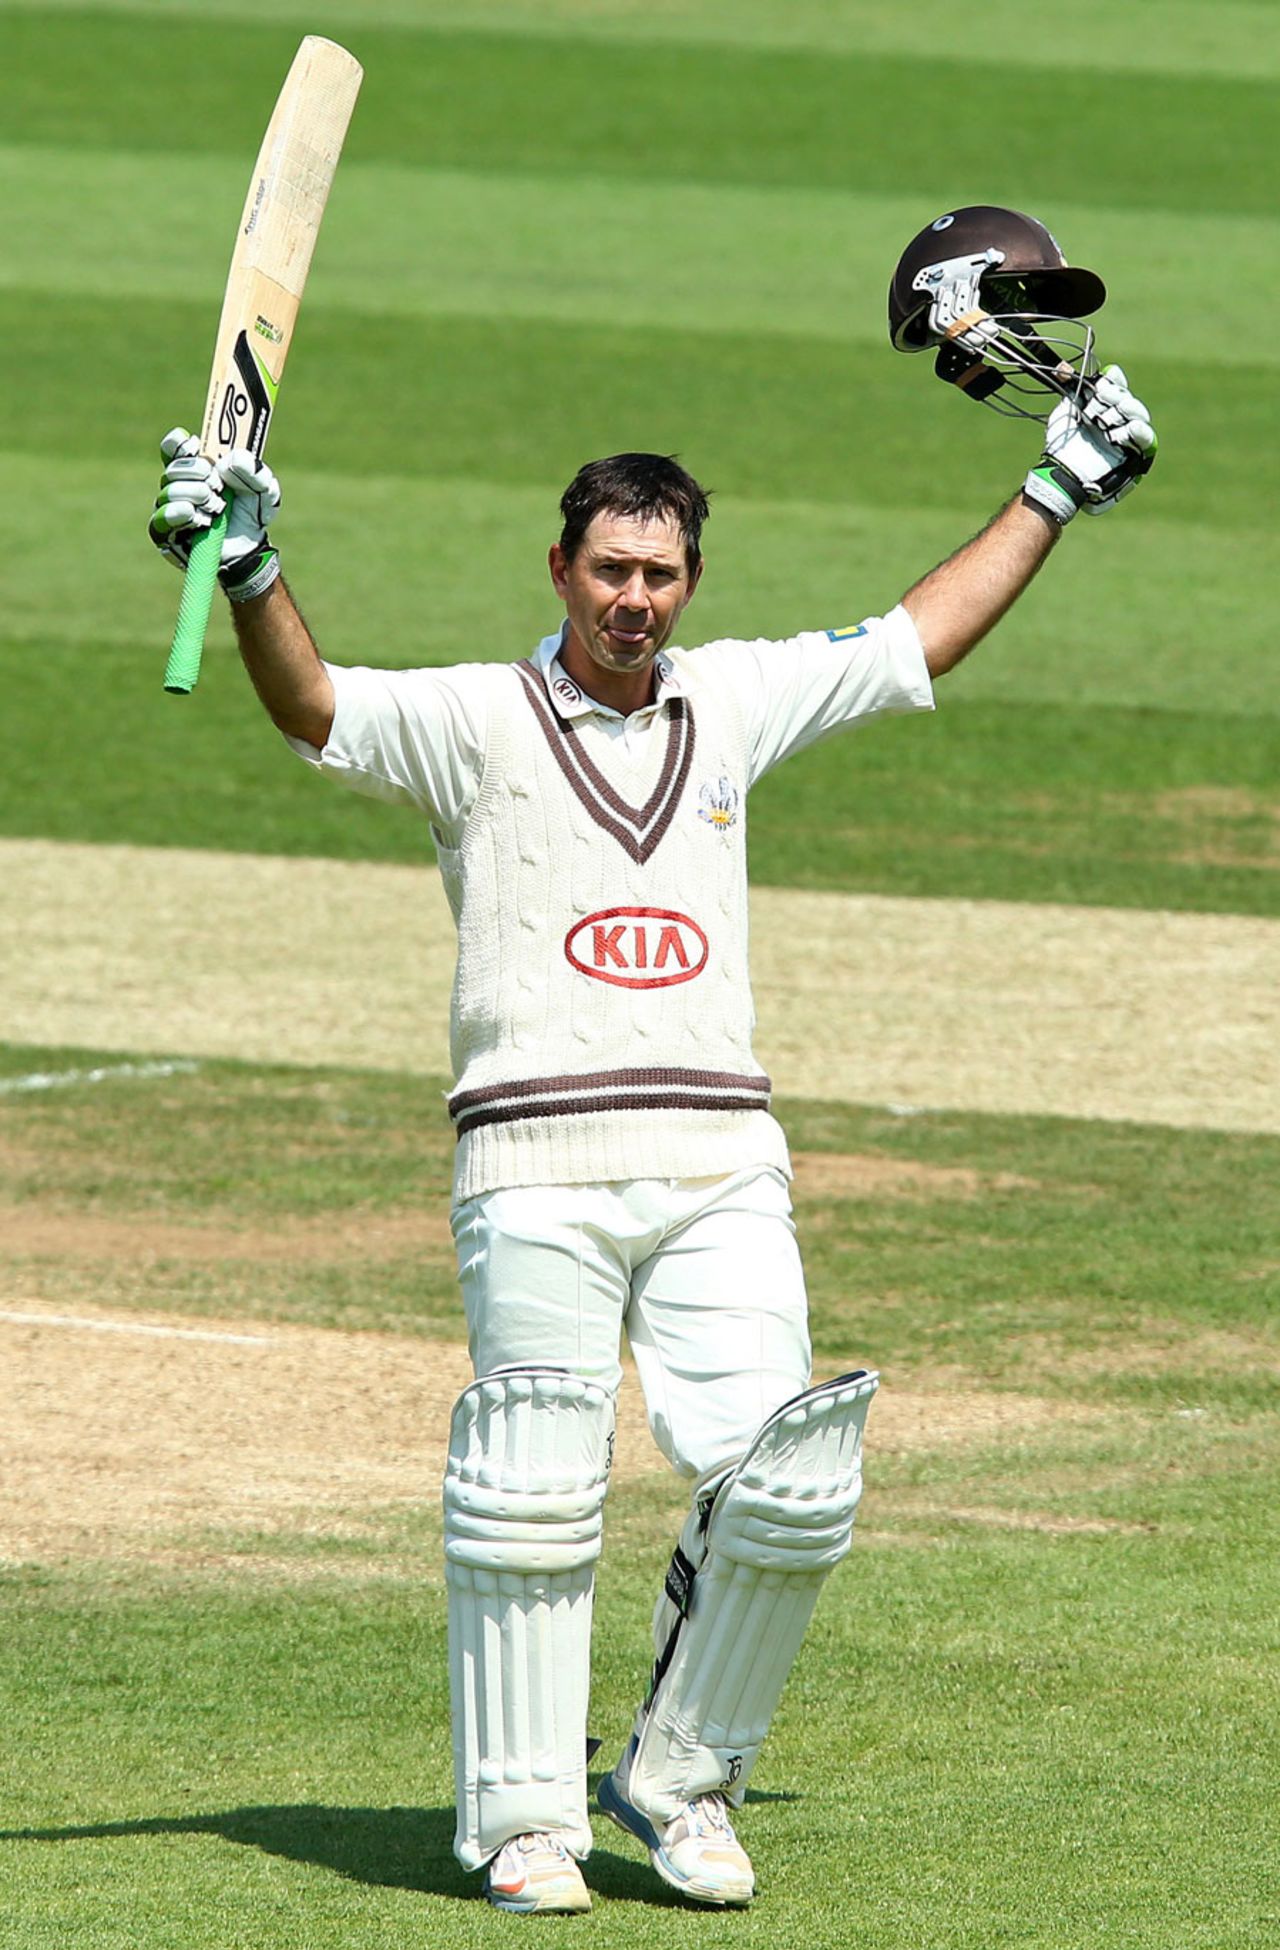 Ricky Ponting scored a century in his final first-class innings, Surrey v Nottinghamshire, County Championship, Division One, The Oval, 4th day, July 11, 2013